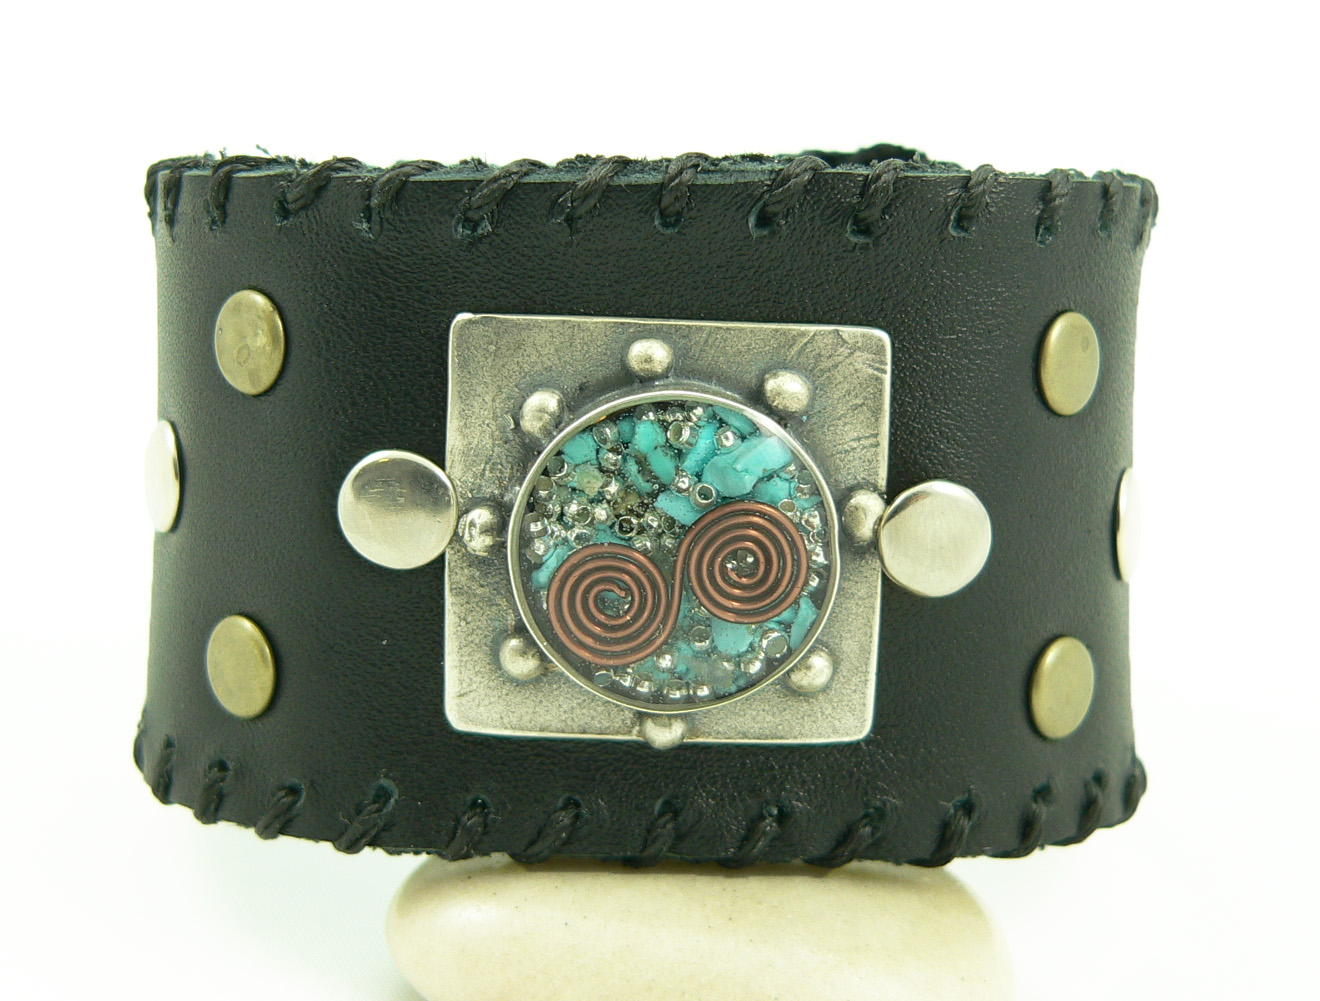 Orgone Energy Men's Cuff in Black & Turquoise, designed and Handcrafted by Lisa Smith, designer/owner, LKS Originals